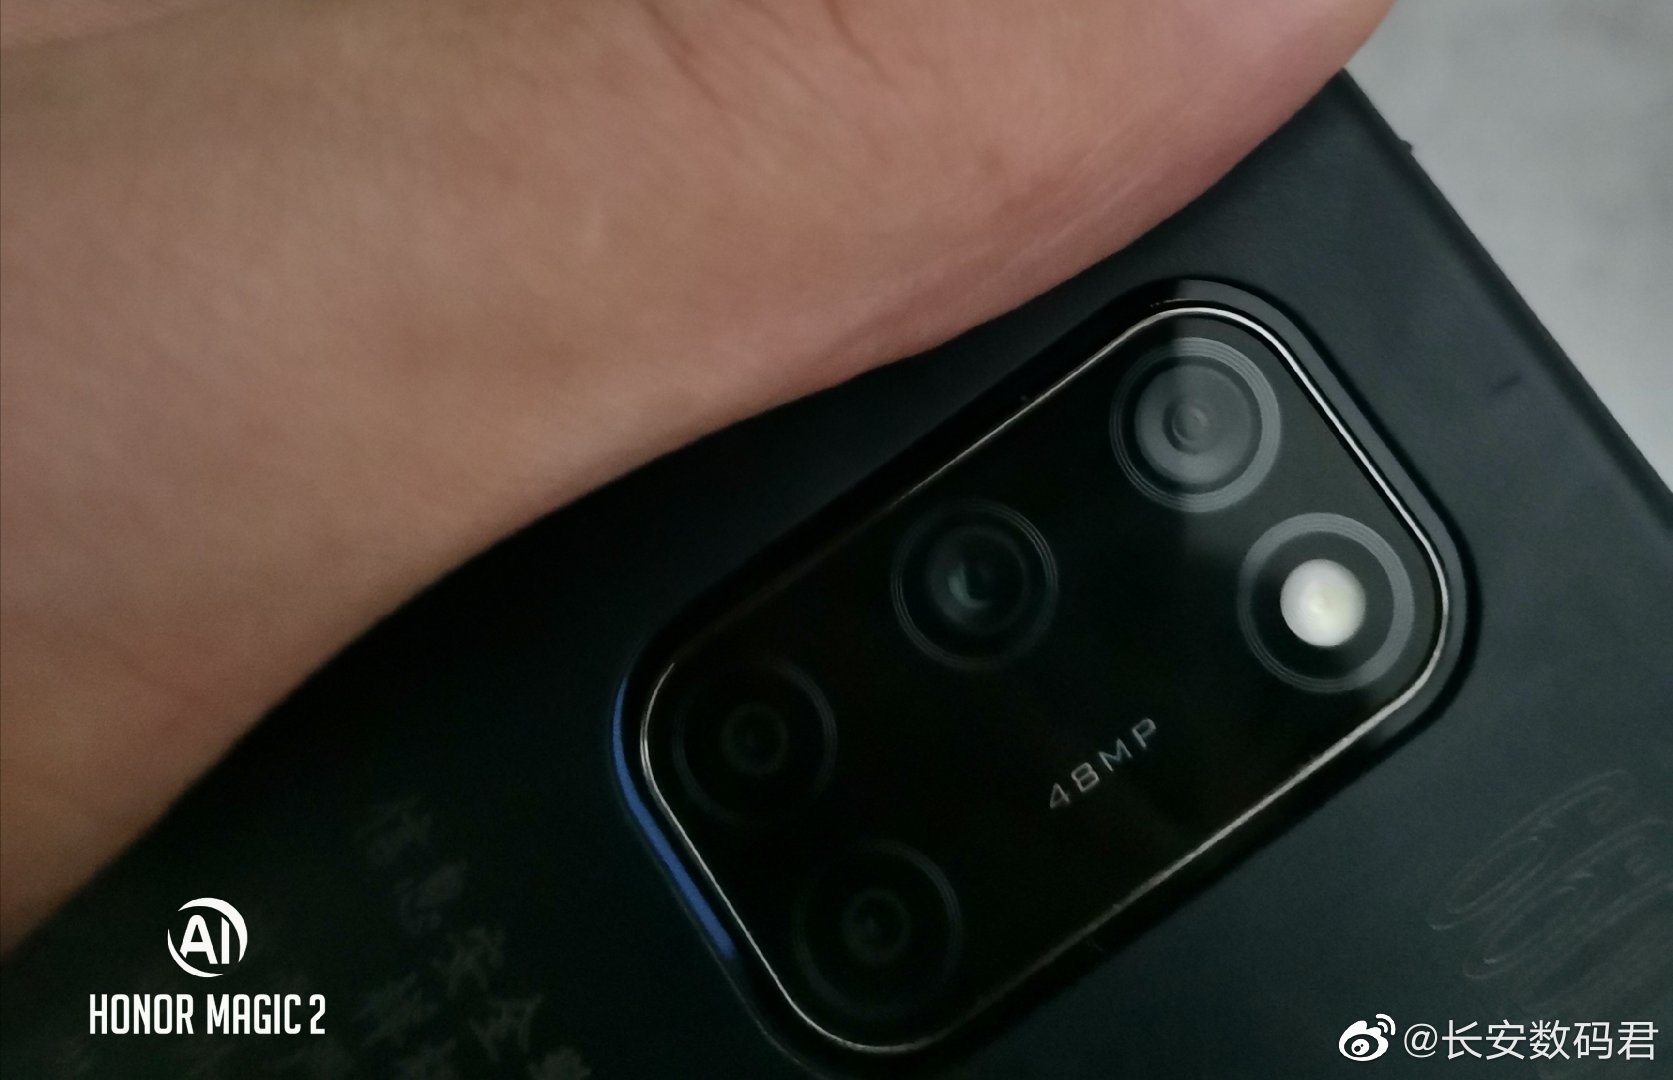 Mystery Huawei / Honor phone spotted with 48MP quad cameras